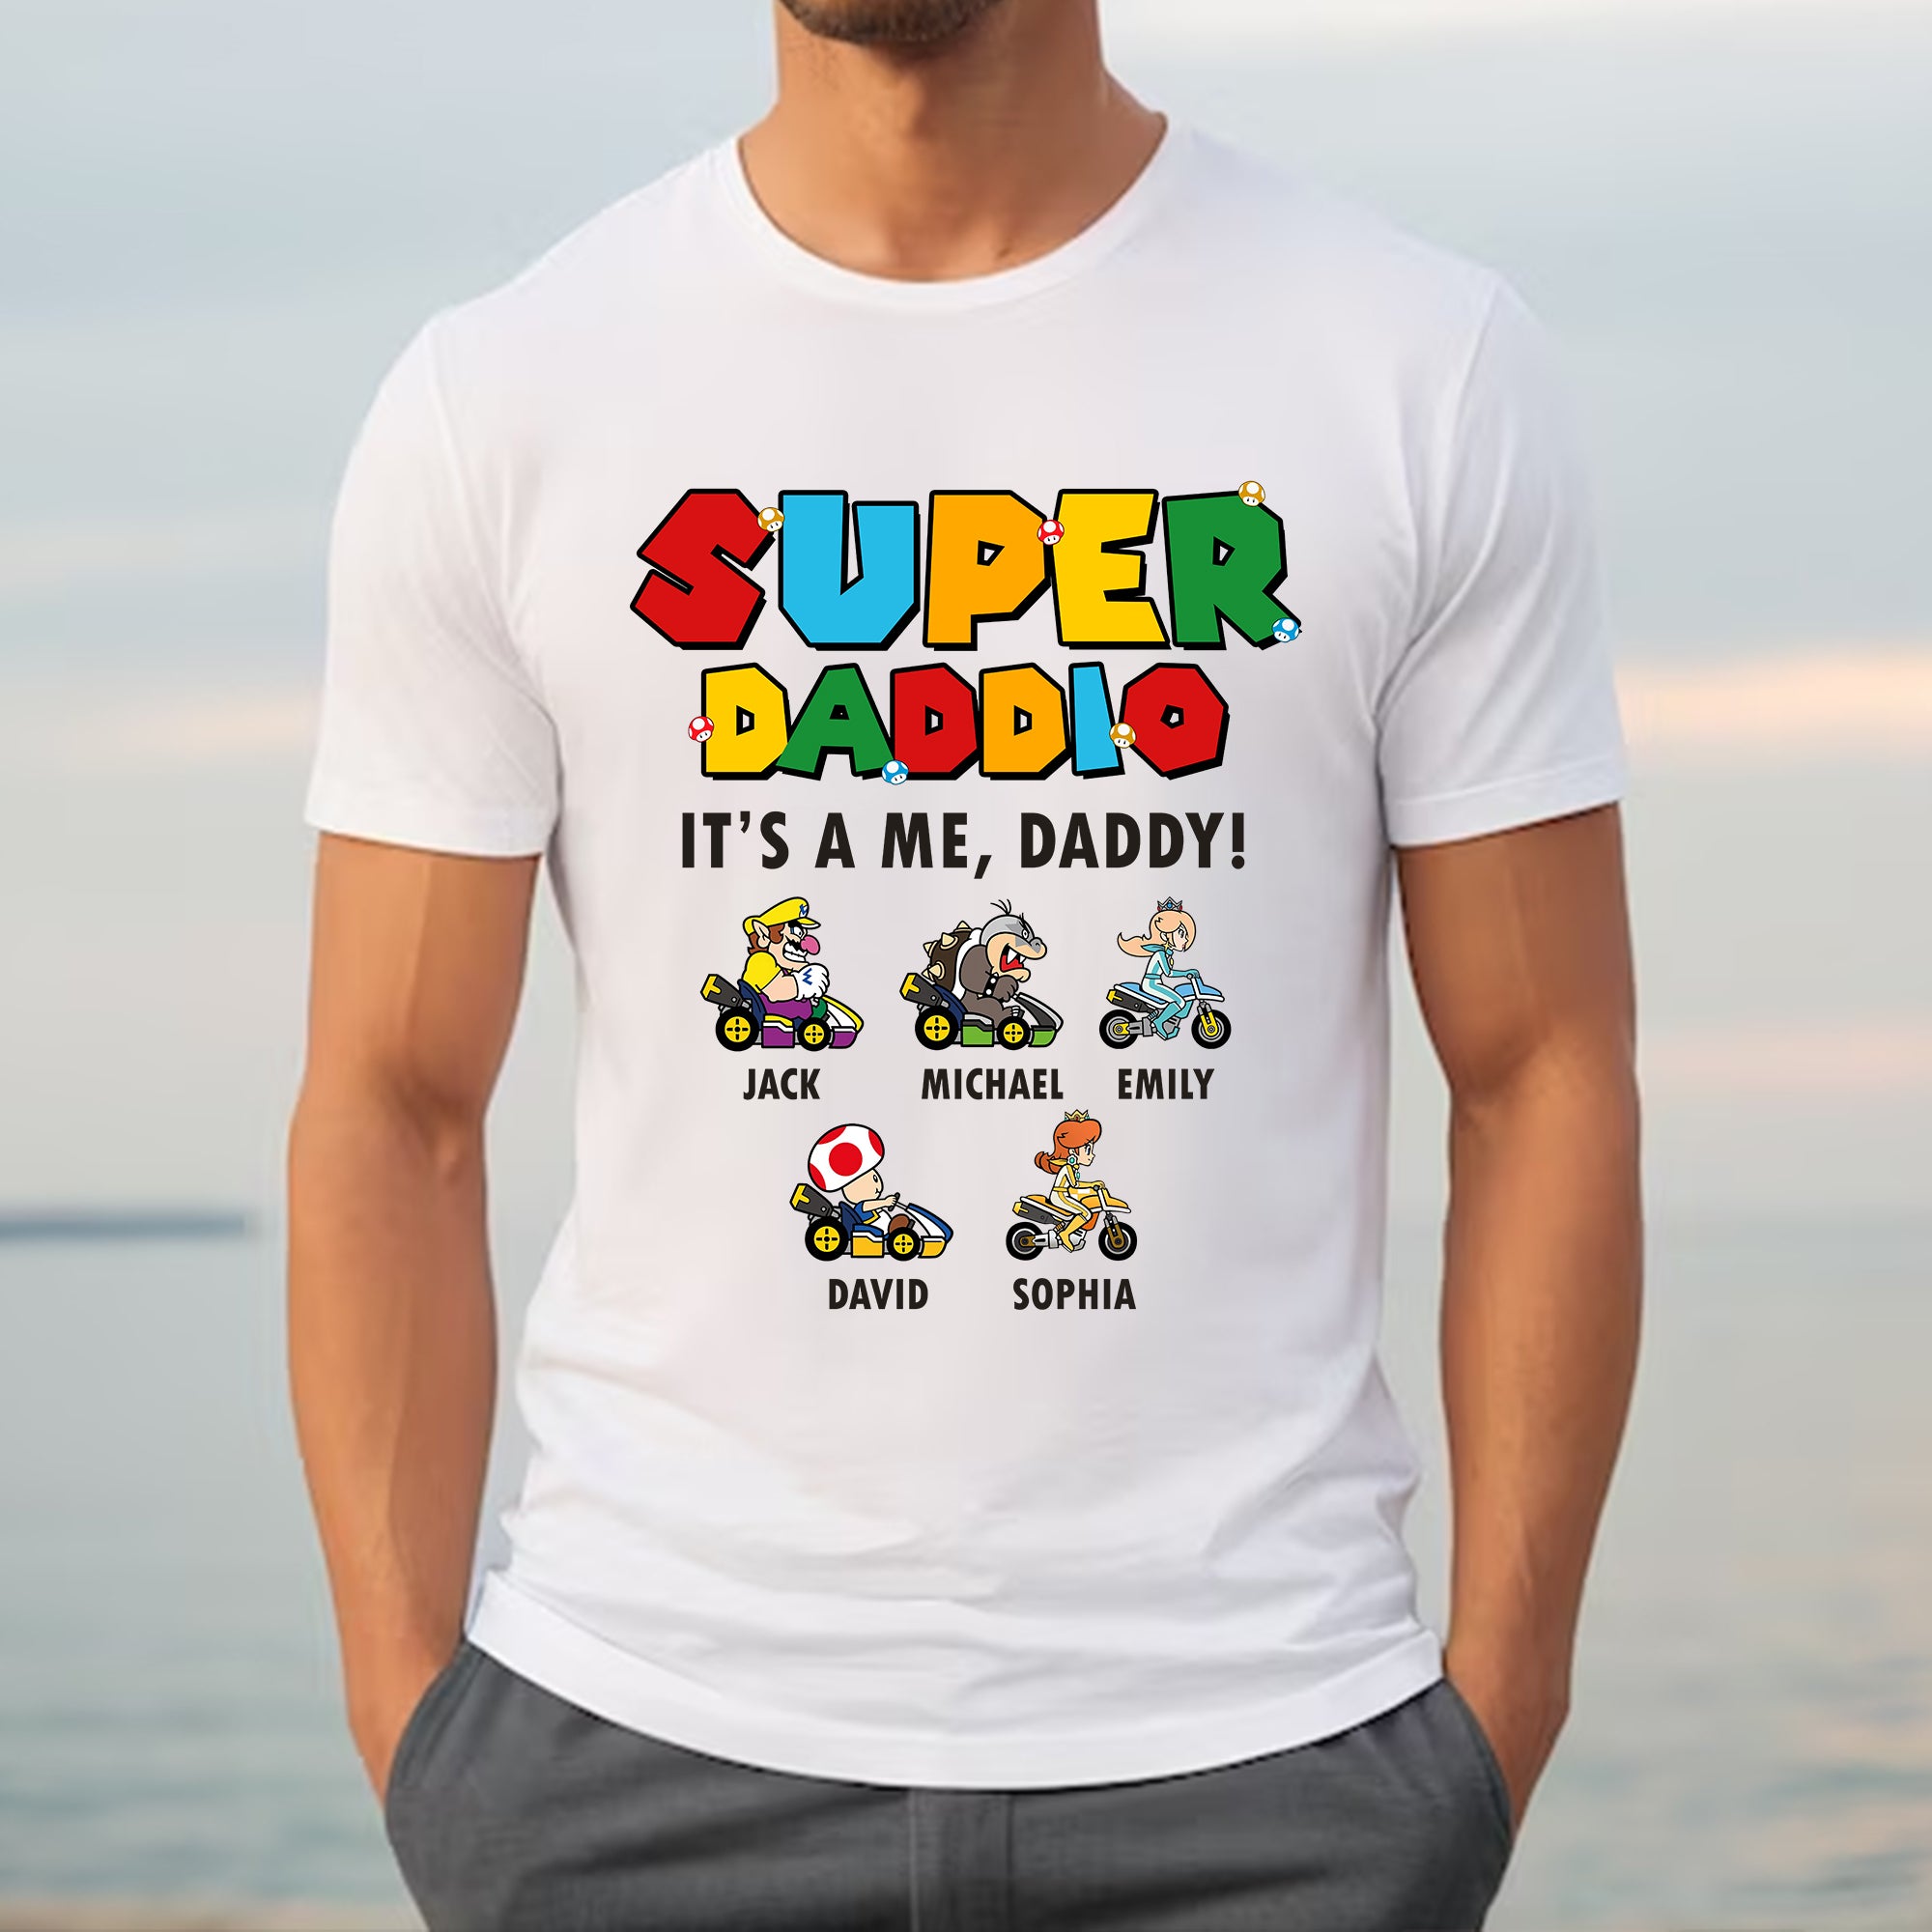 Super Daddio It's A Me, Daddy - Personalized T-Shirt - Gift For Family, Gift For Dad